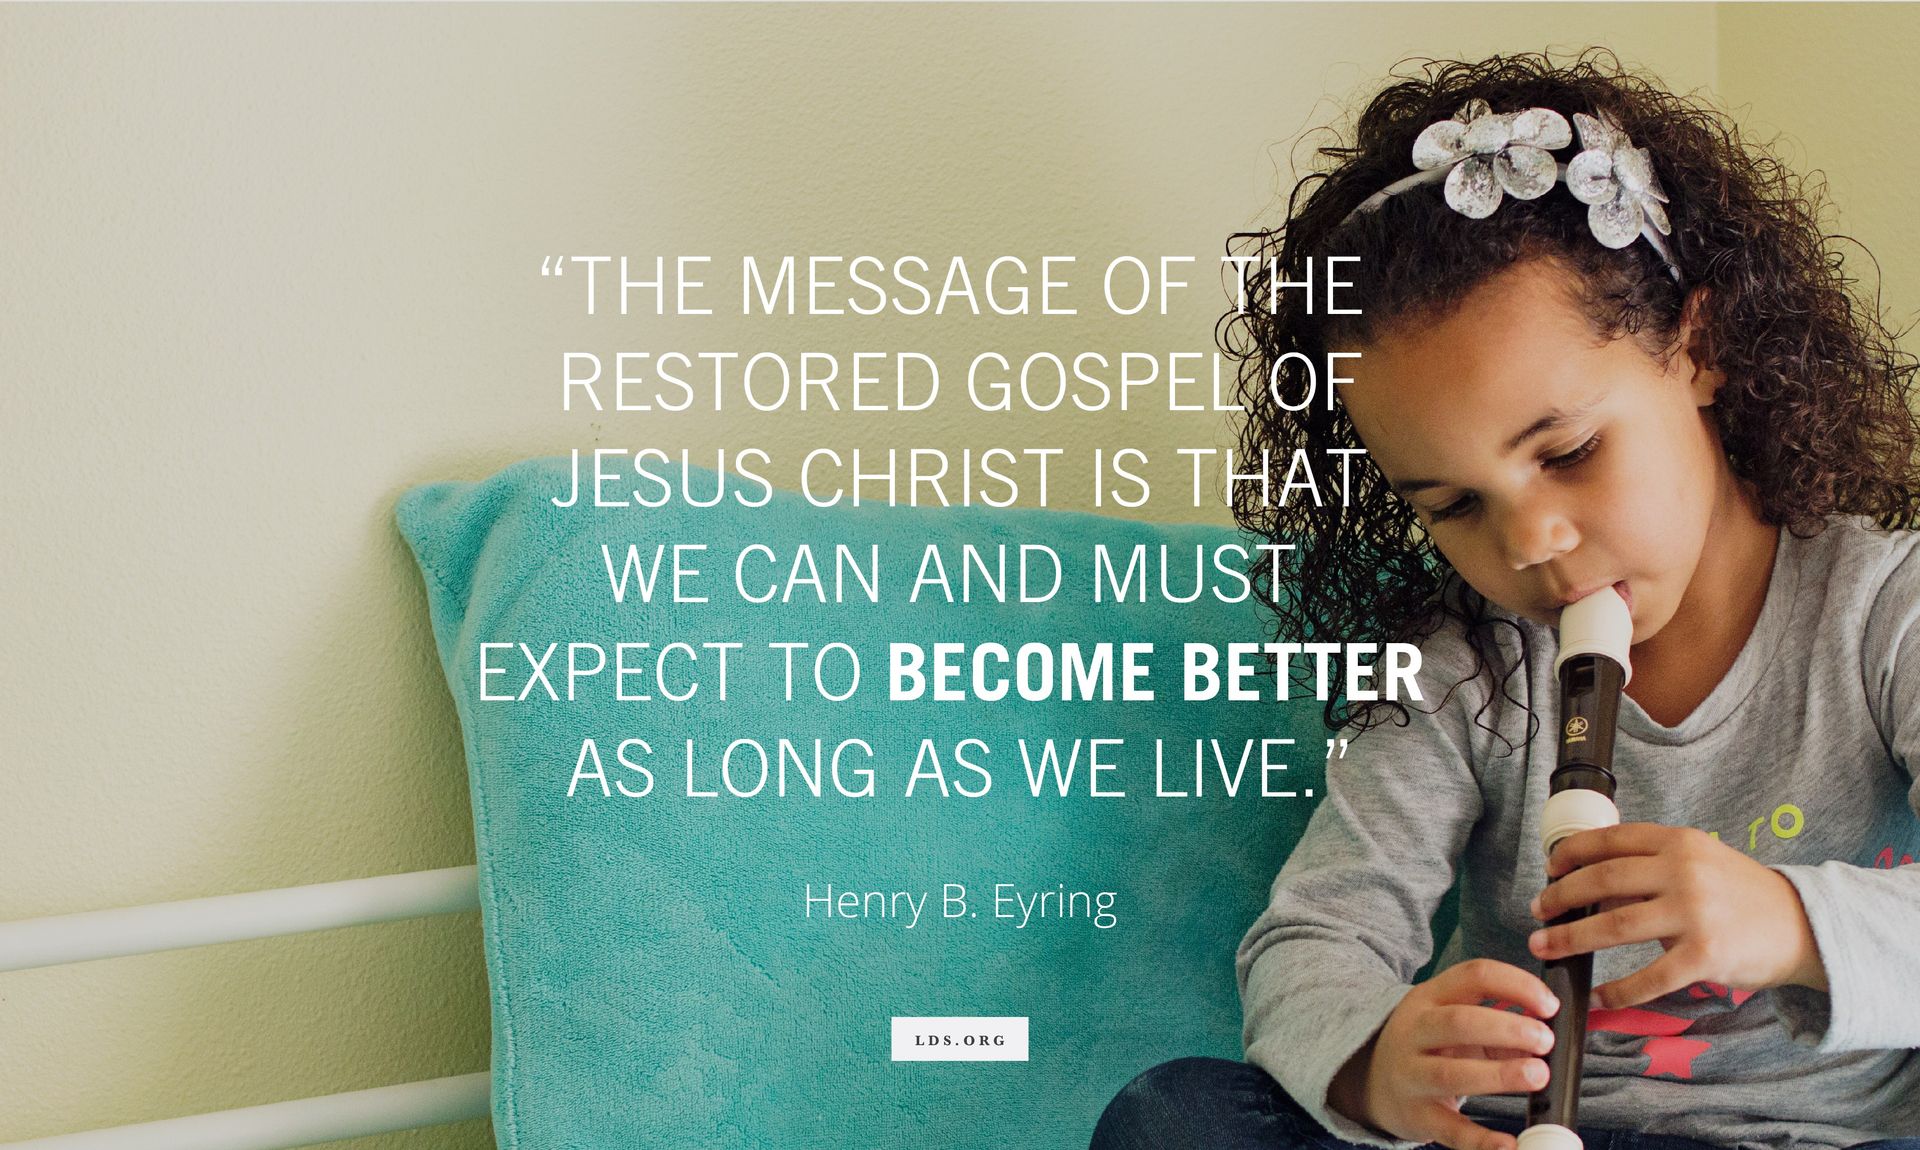 “The message of the restored gospel of Jesus Christ is that we can and must expect to become better as long as we live.” —President Henry B. Eyring, “Our Perfect Example” © undefined ipCode 1.